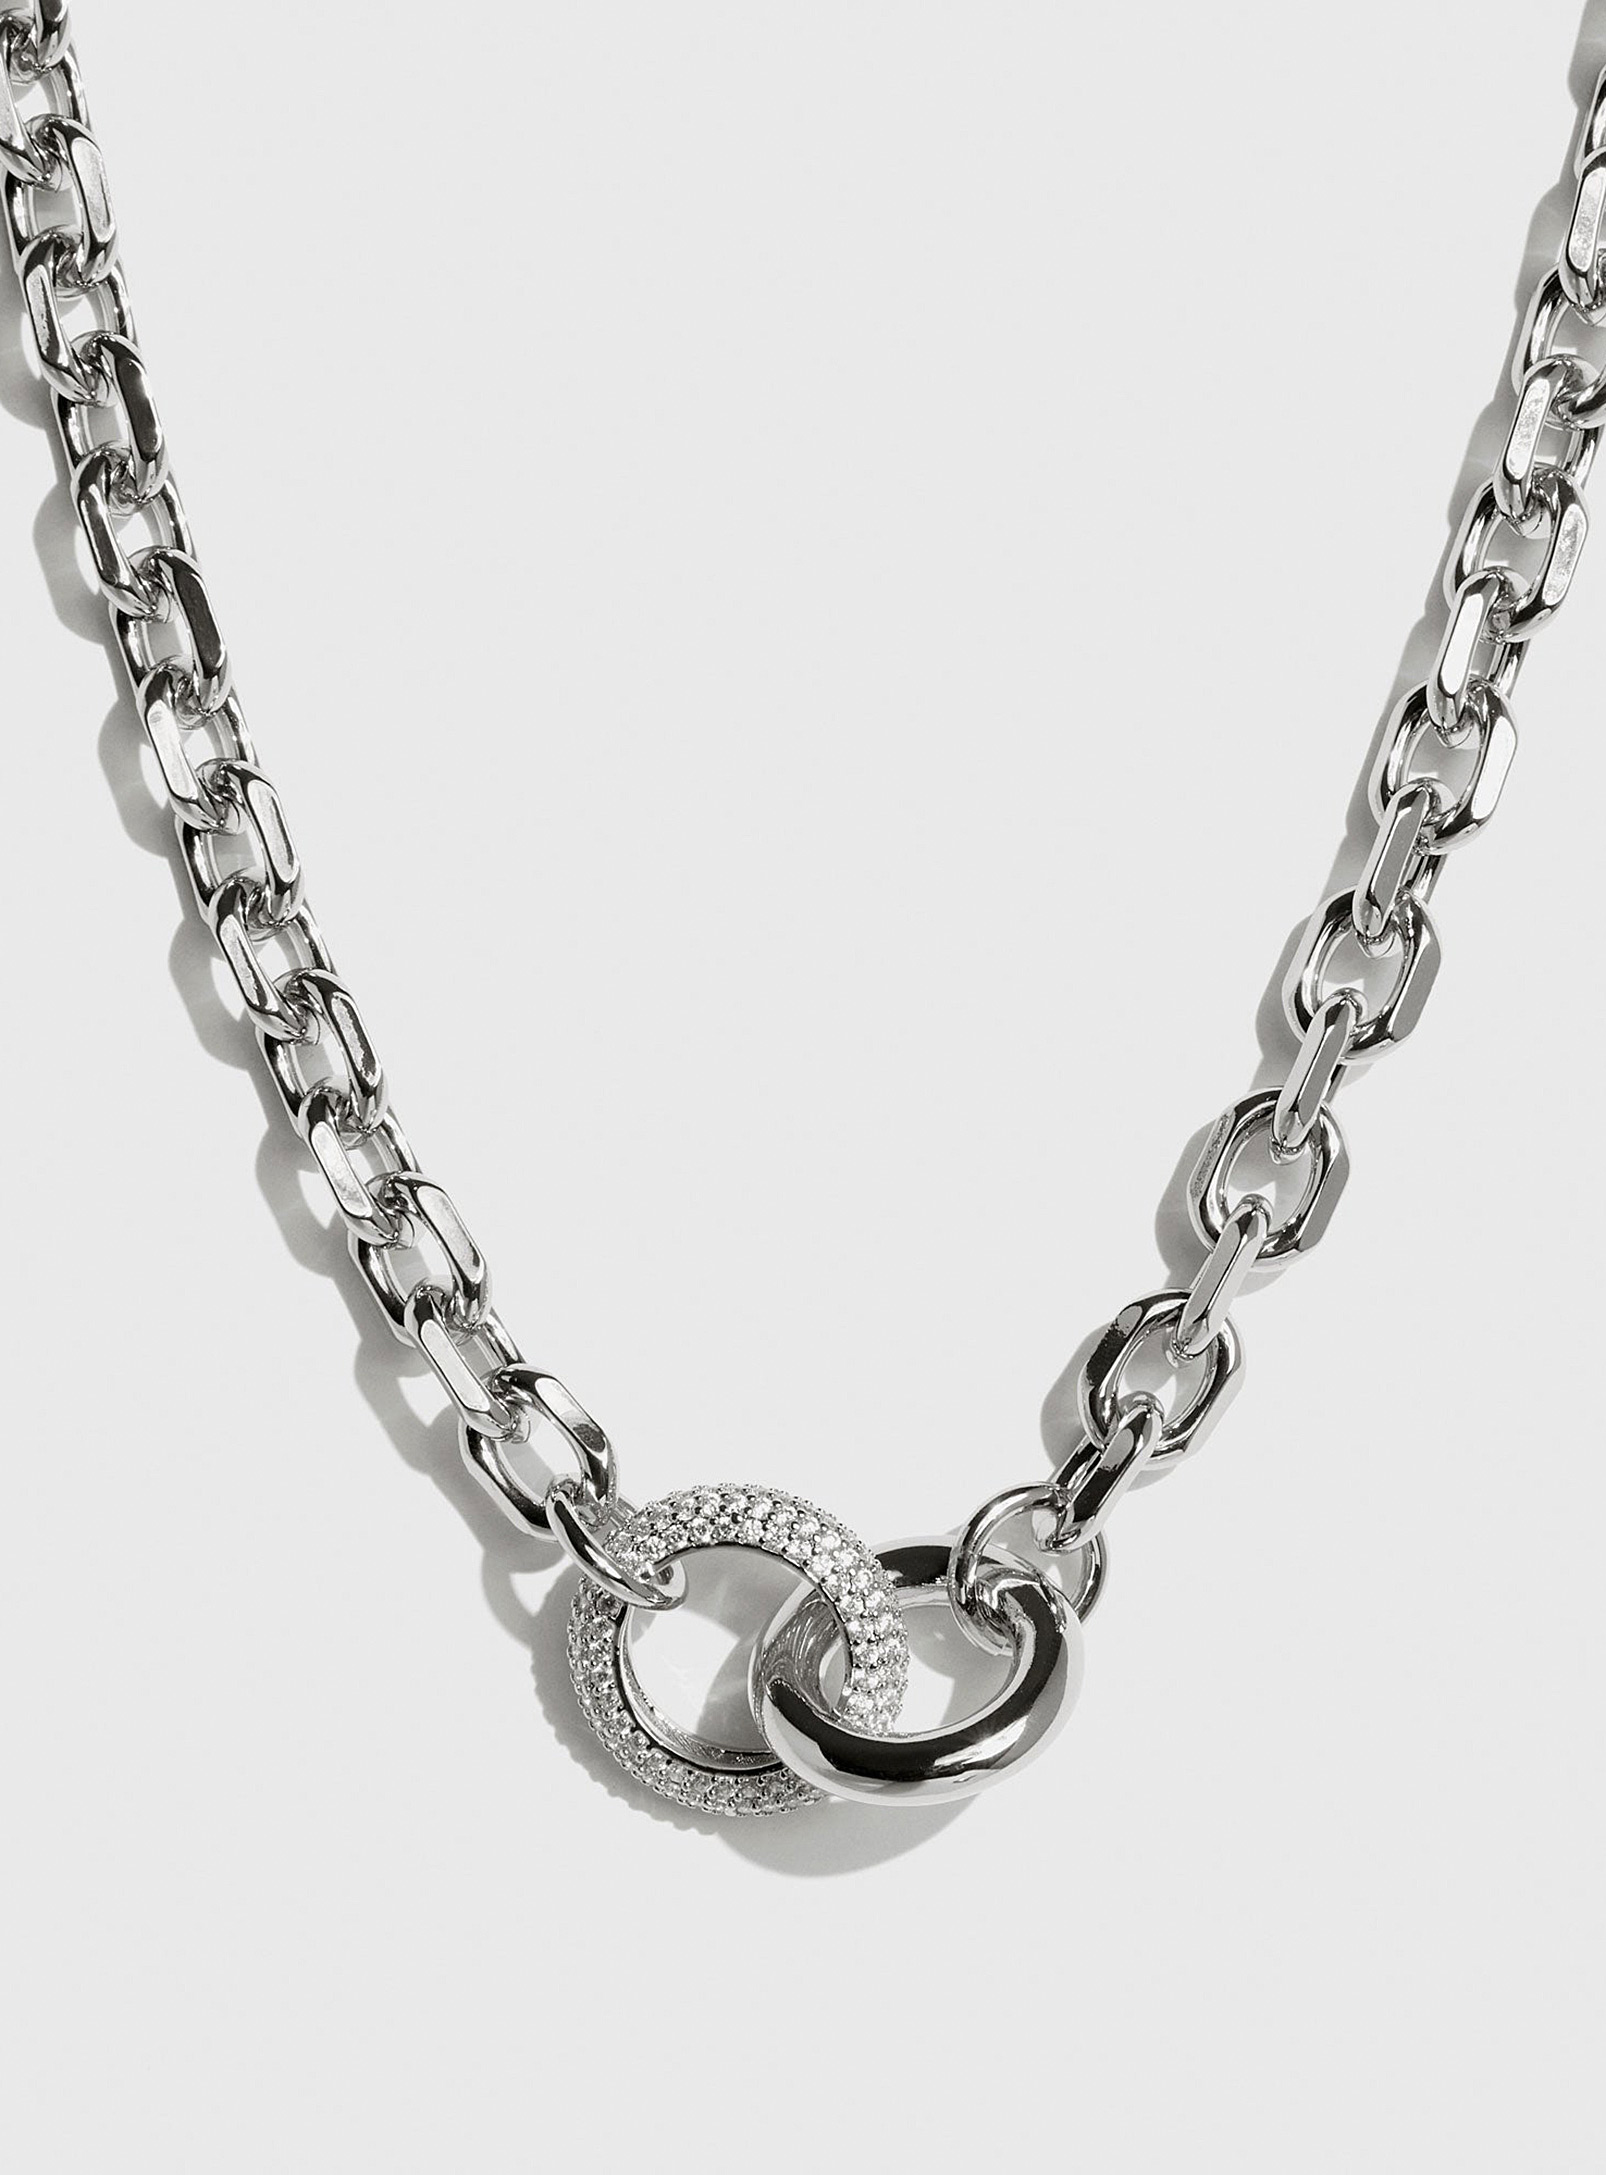 Drae 2gether Chain In Silver